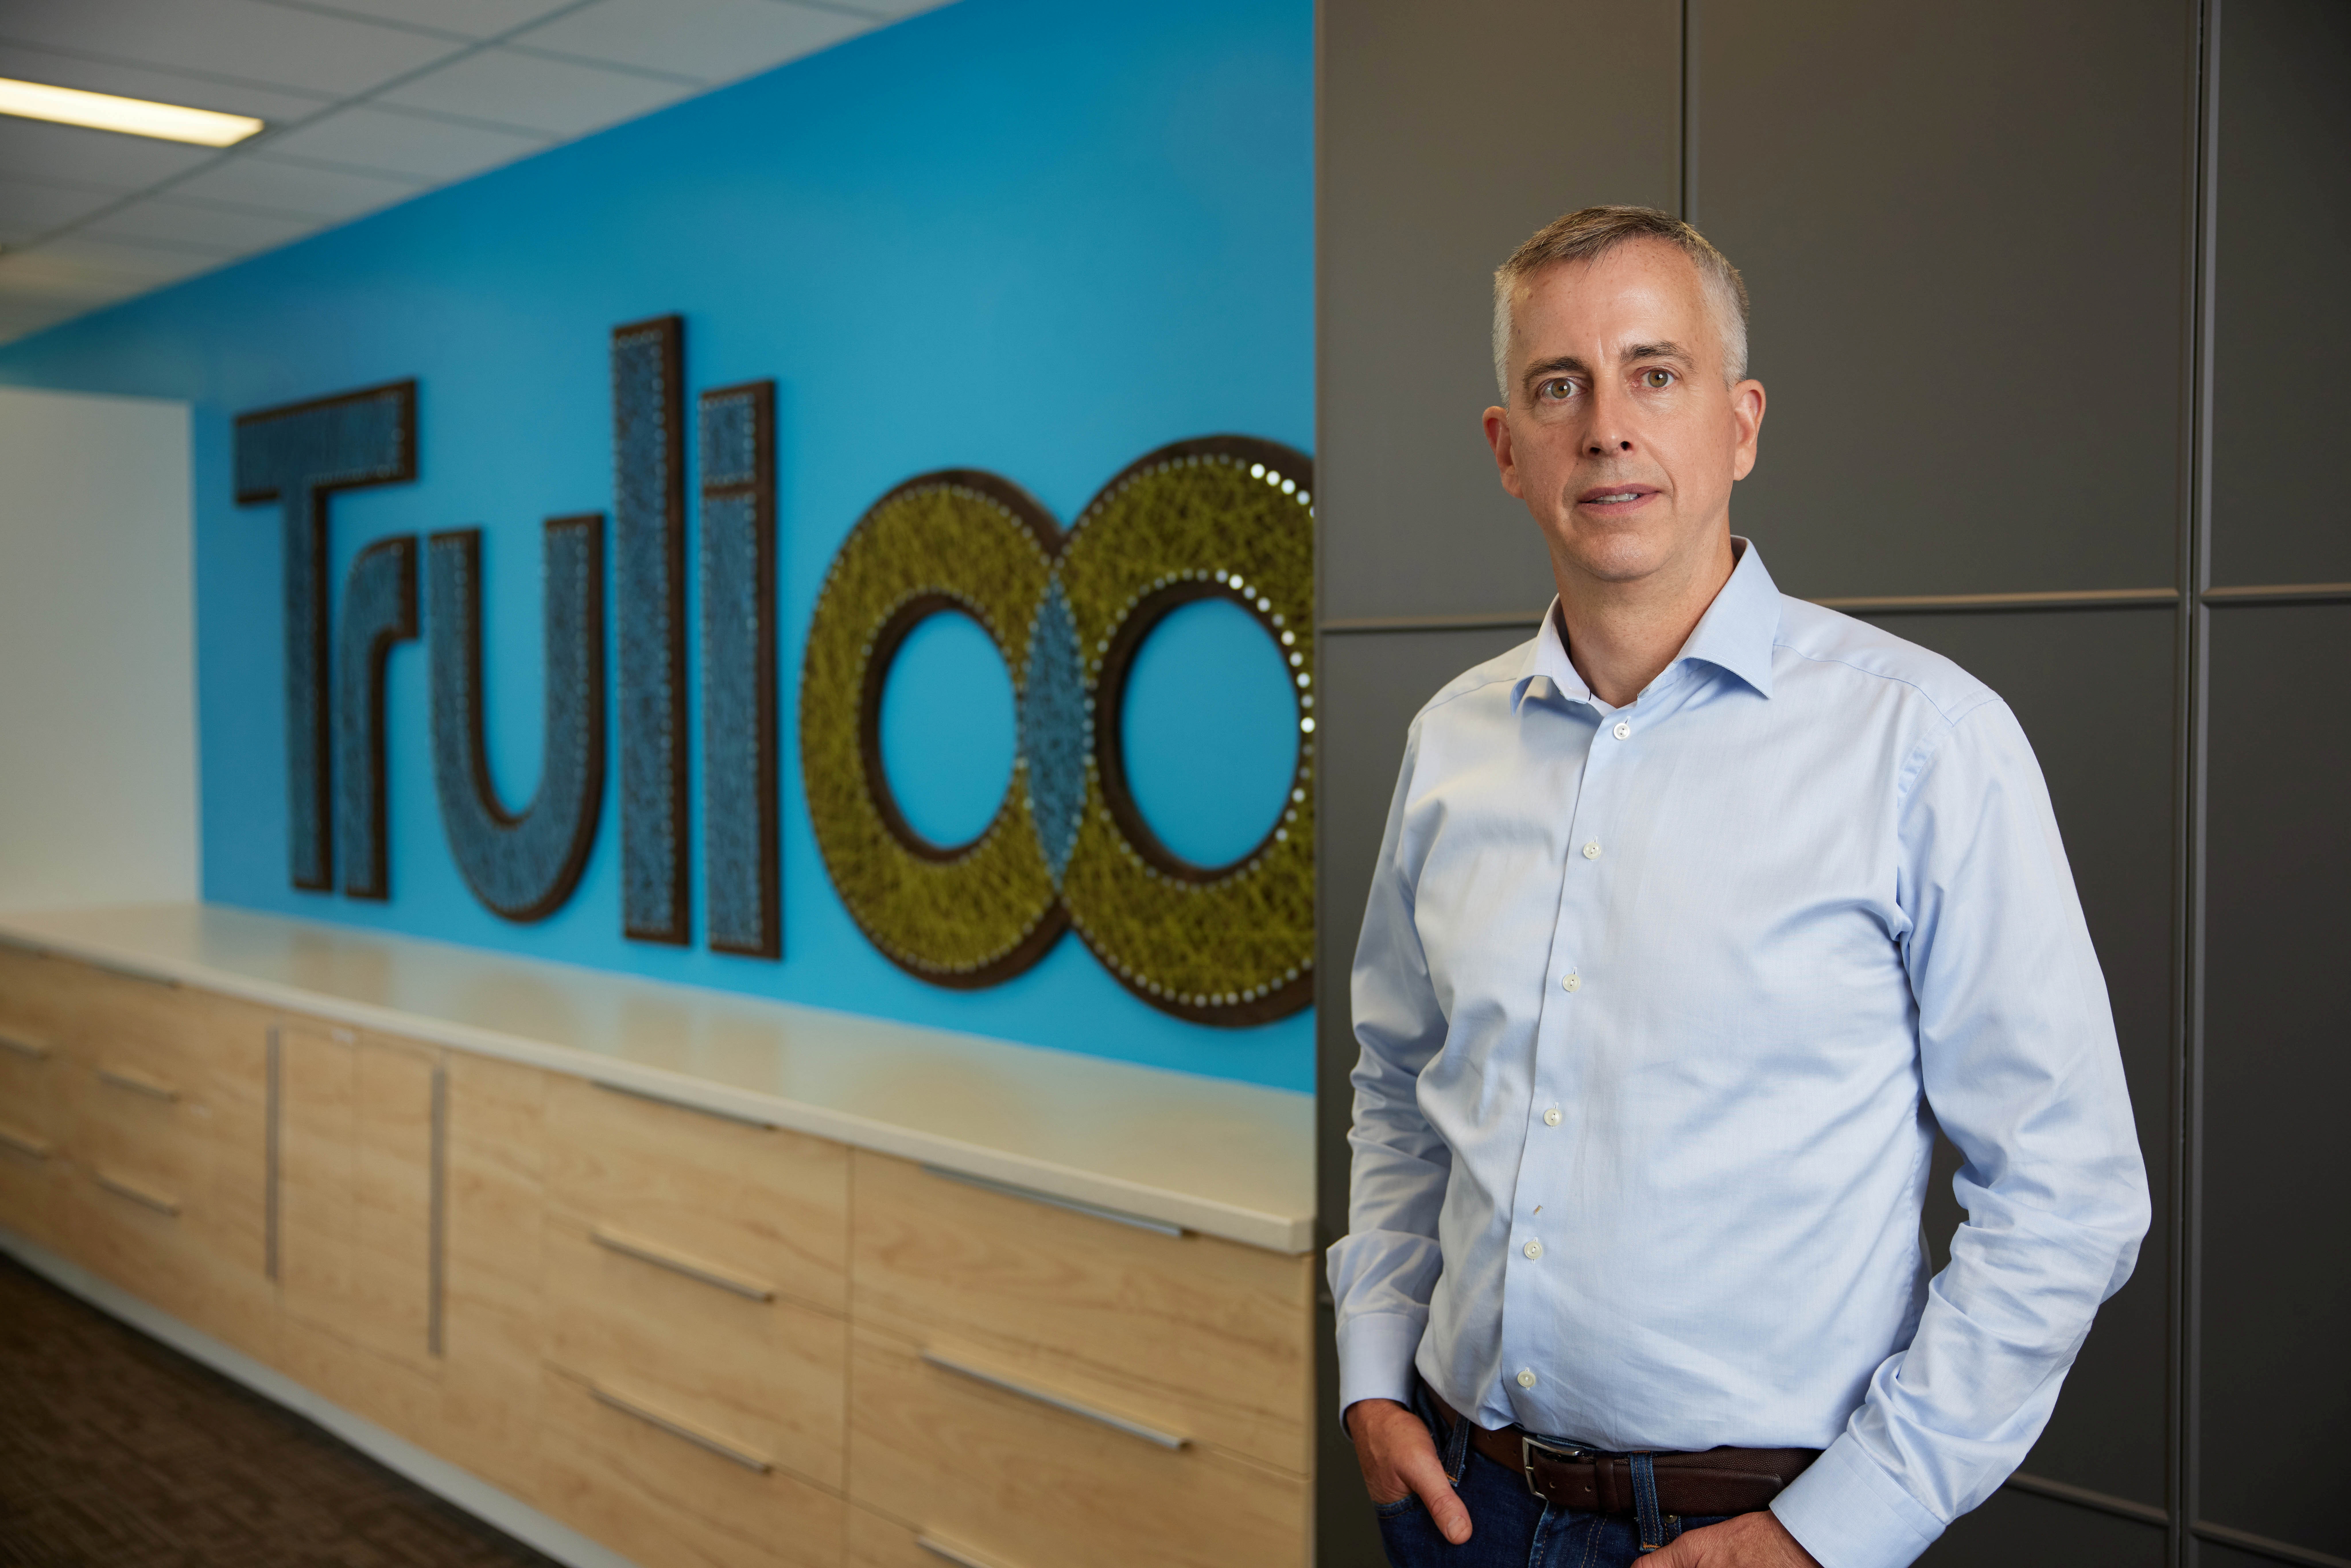 Steve Munford, CEO of Trulioo, a Canadian-based startup that provides electronic identity and address verification globally, poses in front of the company logo in this undated handout photo